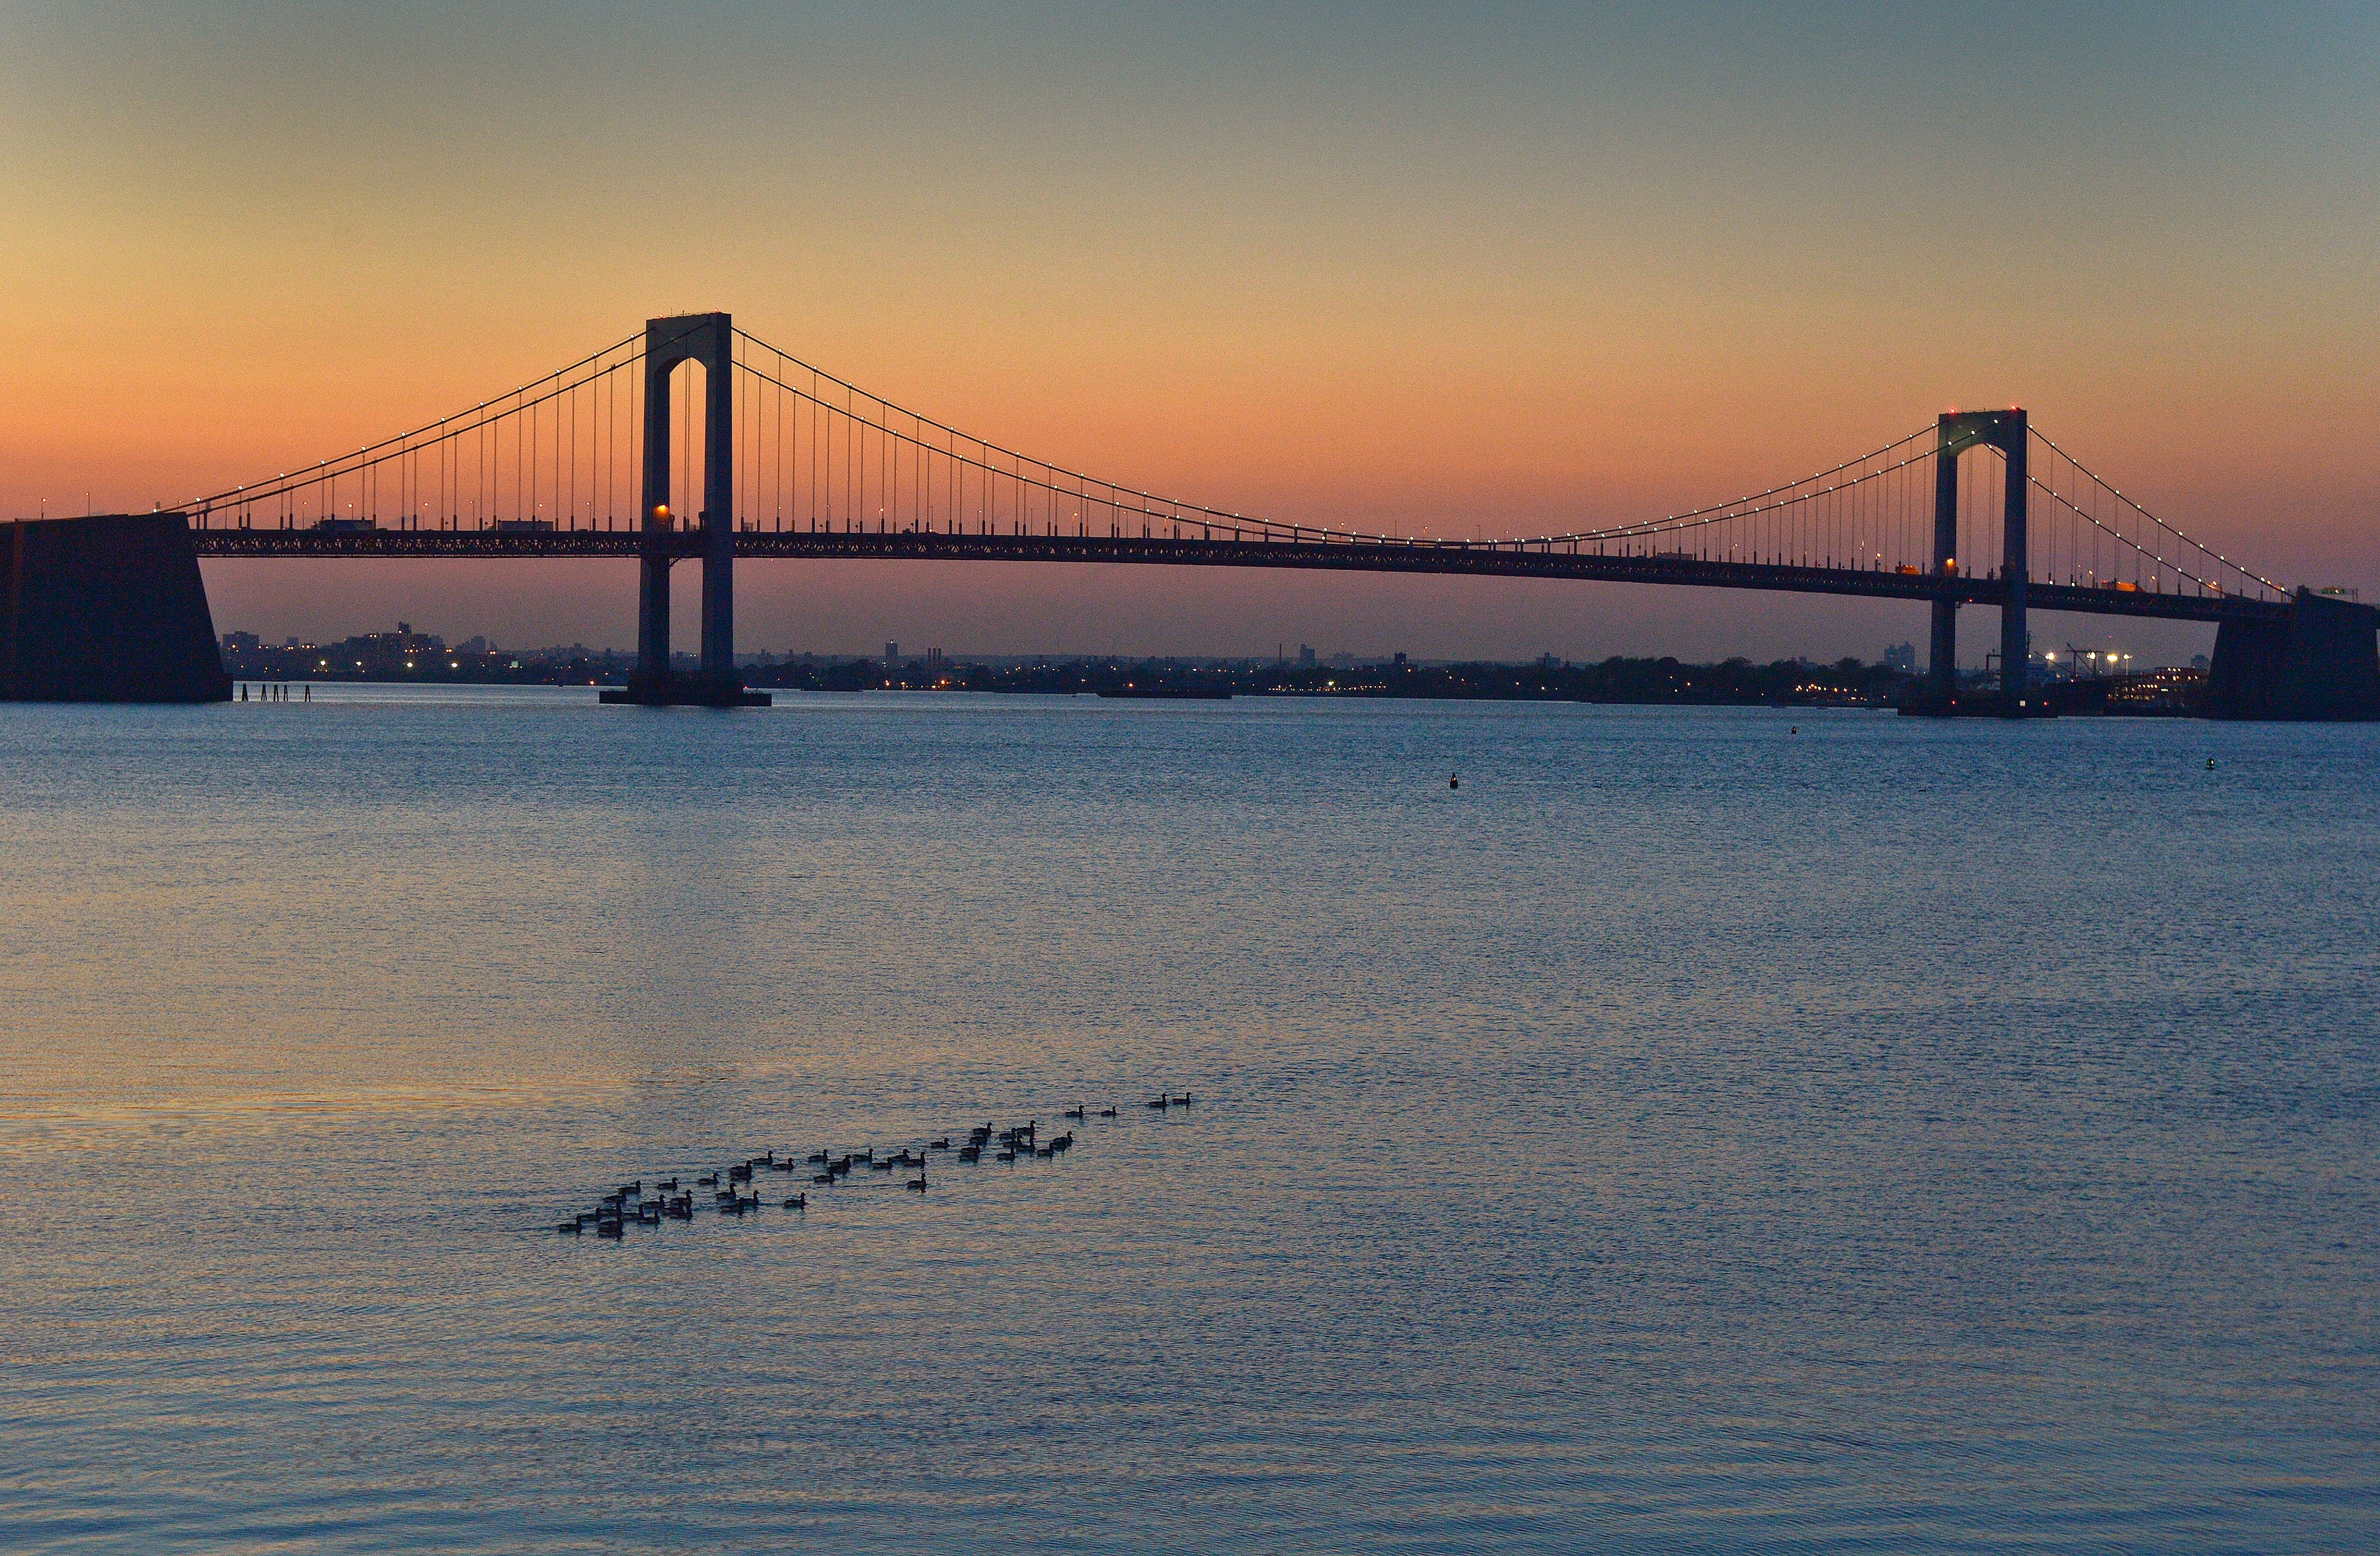 MTA Bridges and Tunnels to Begin Next Section of Deck Replacement on Throgs Neck Bridge